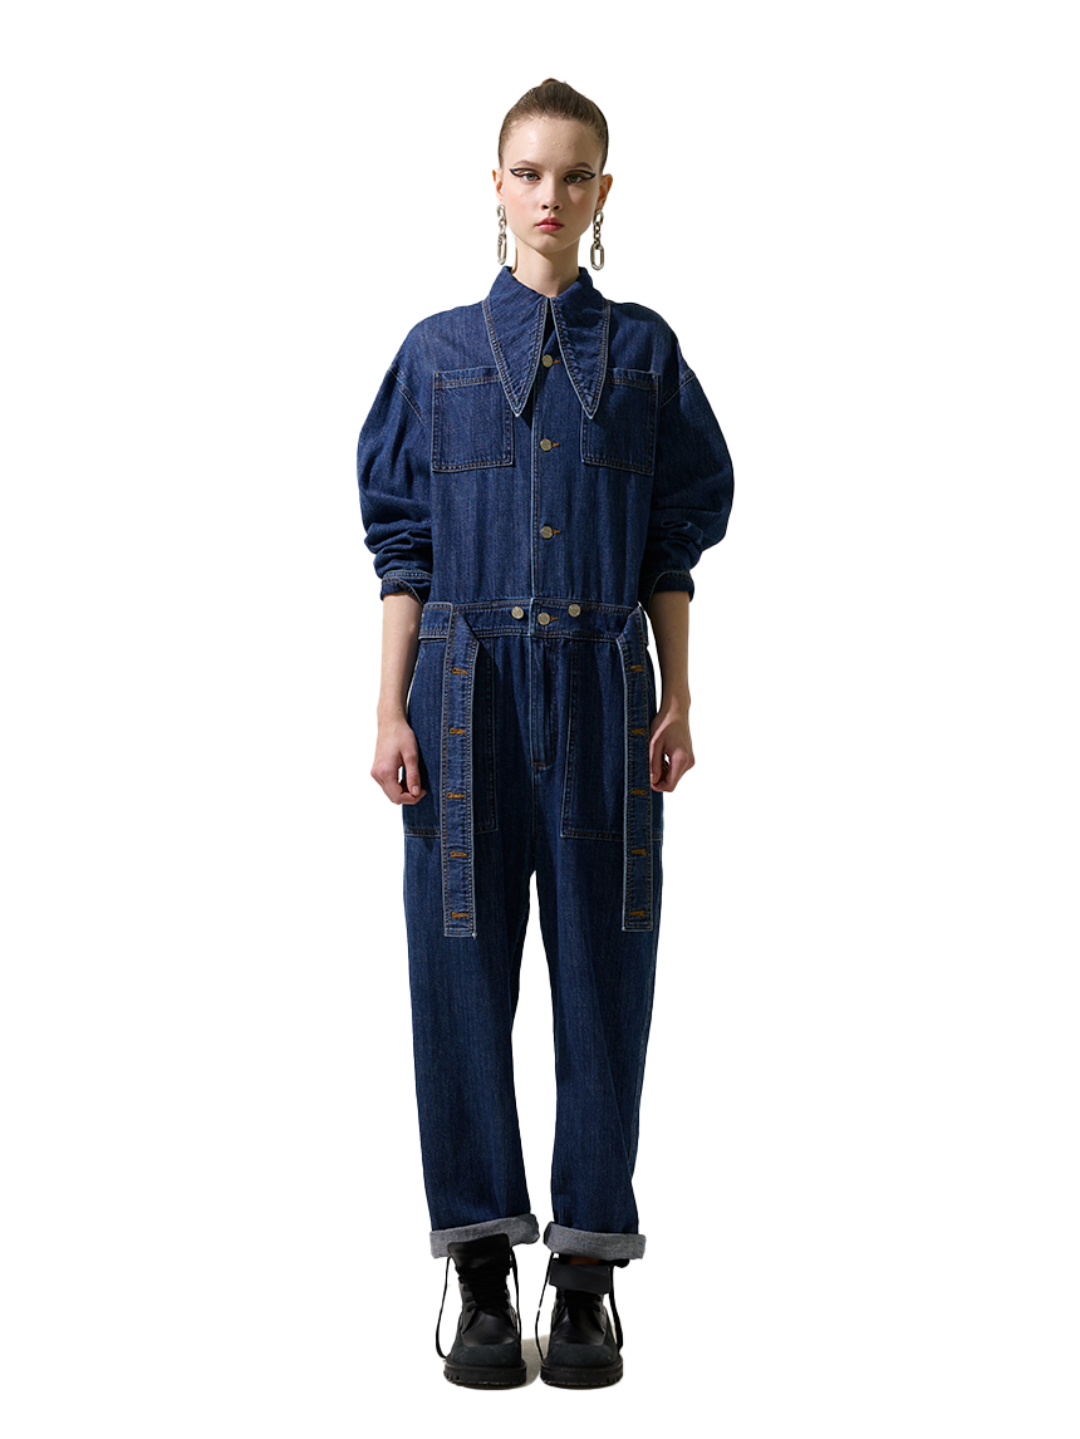 Jean Issue 01 Jumpsuit